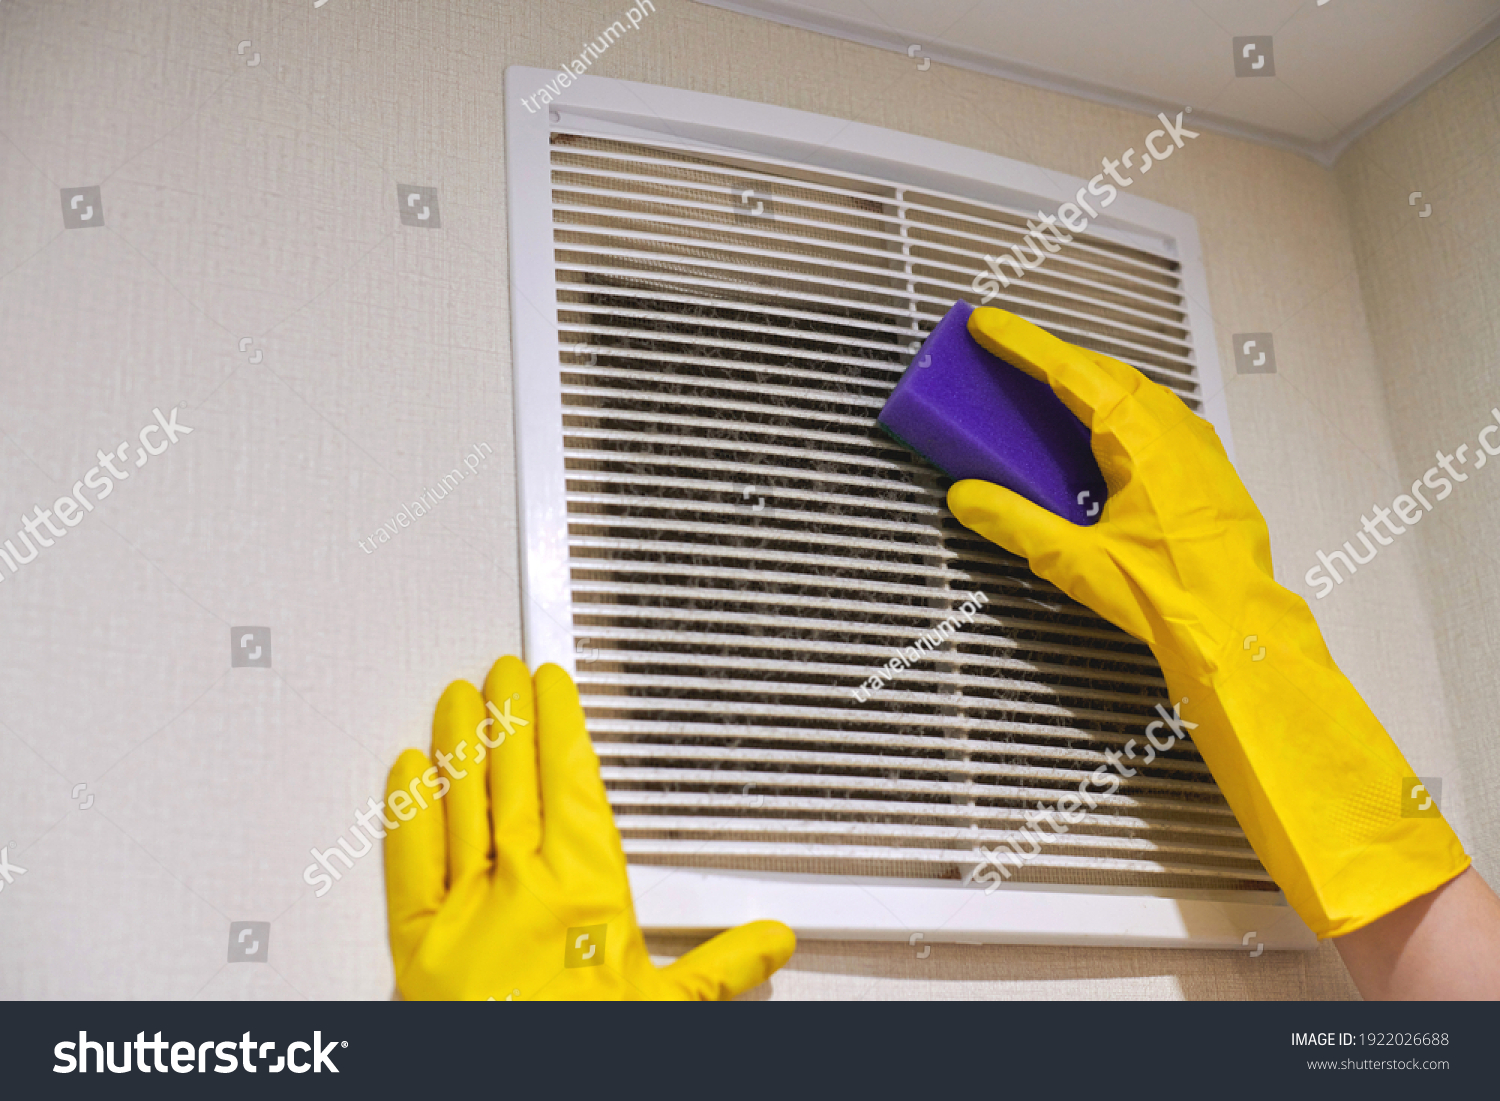 Hands in protective rubber gloves cleaning dusty air ventilation grill of HVAC. Cleaning service concept. #1922026688